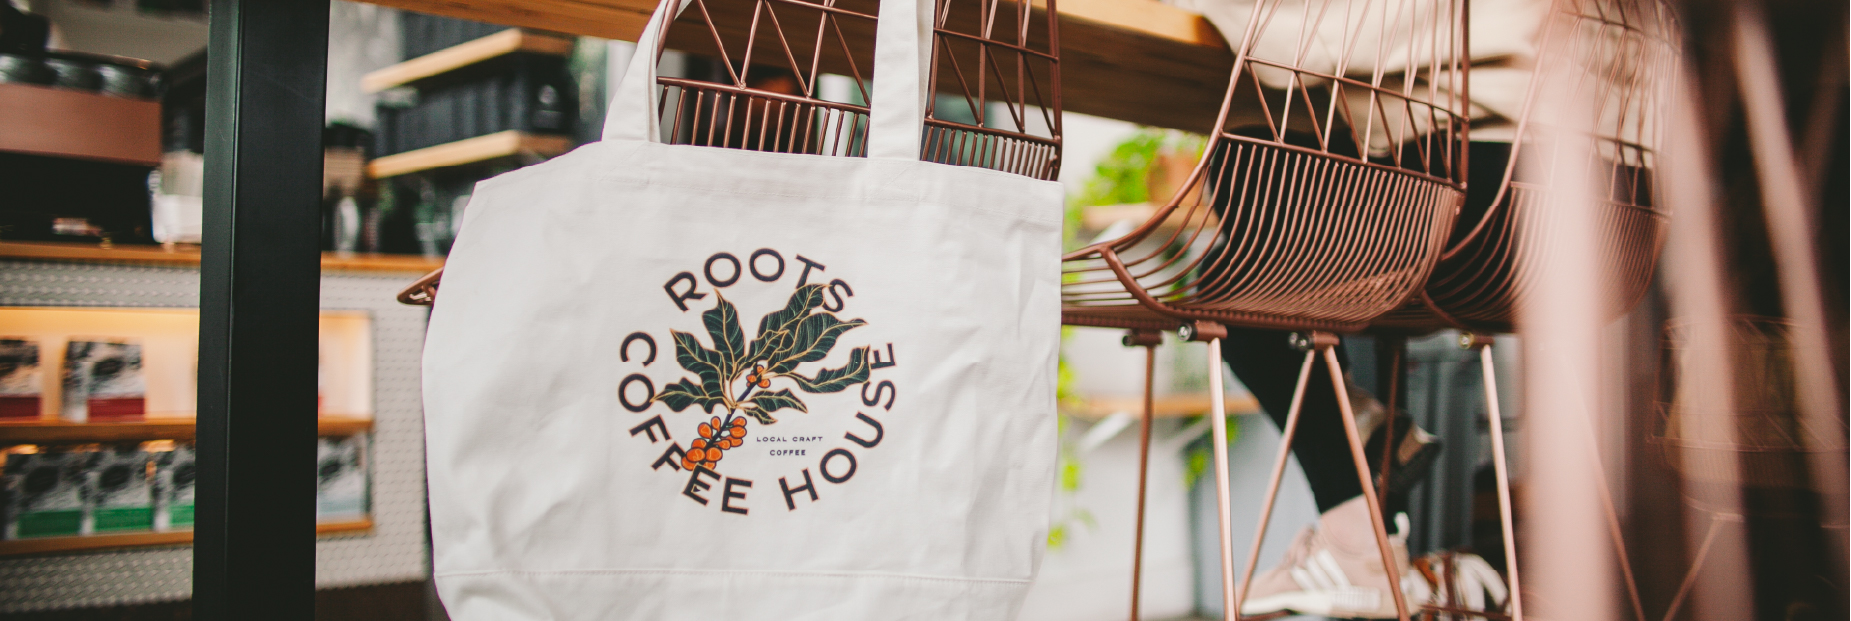 general public branding company roots coffee house fort worth texas